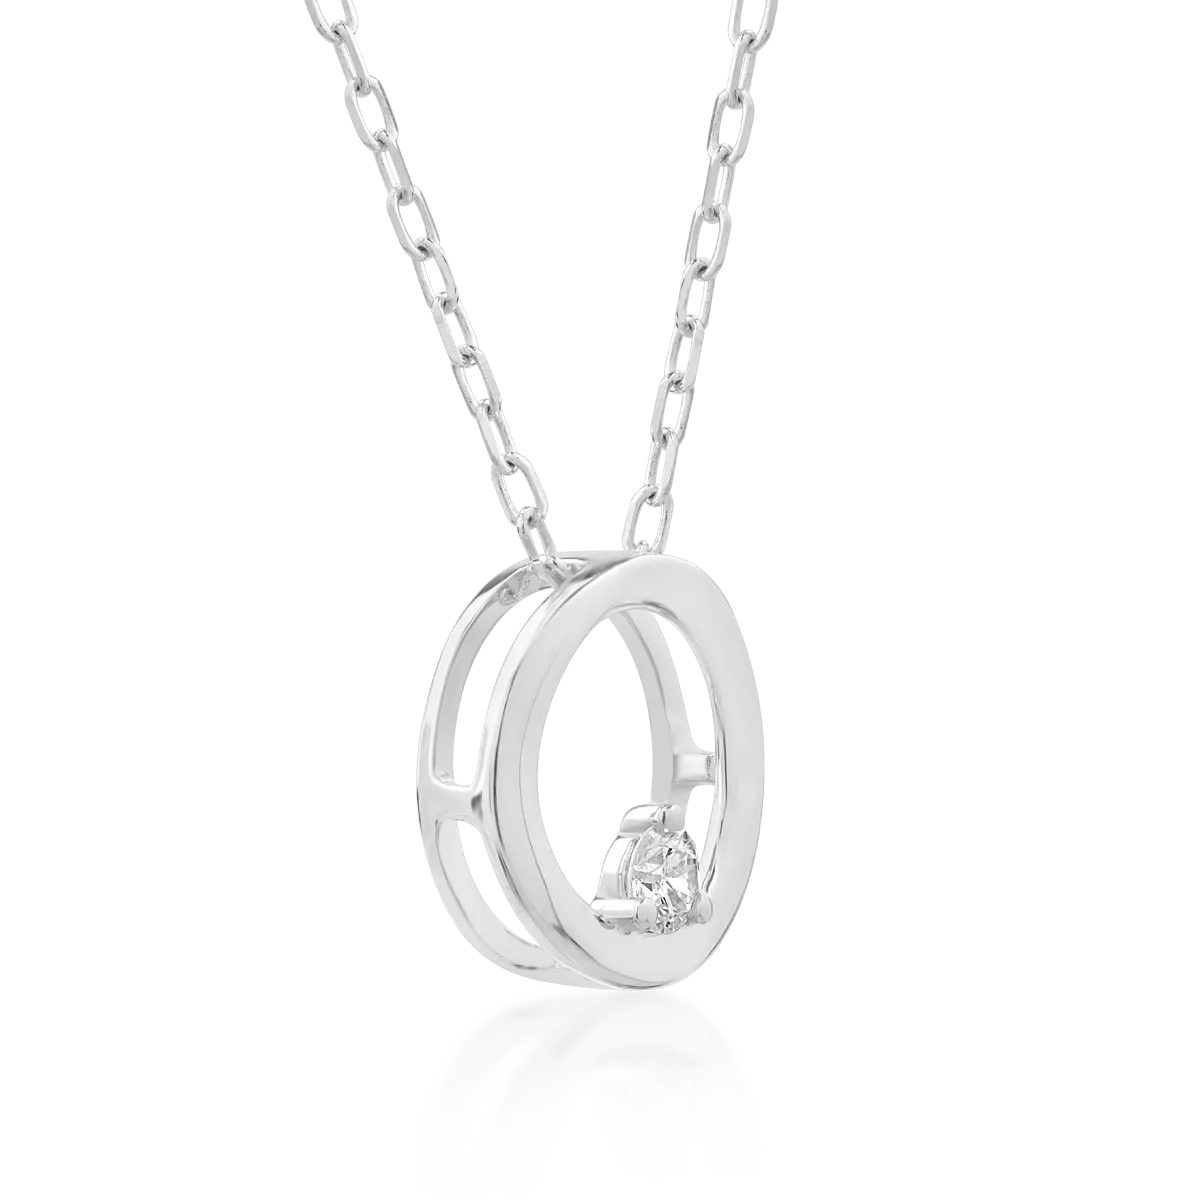 18K white gold pendant necklace with 0.035ct diamond